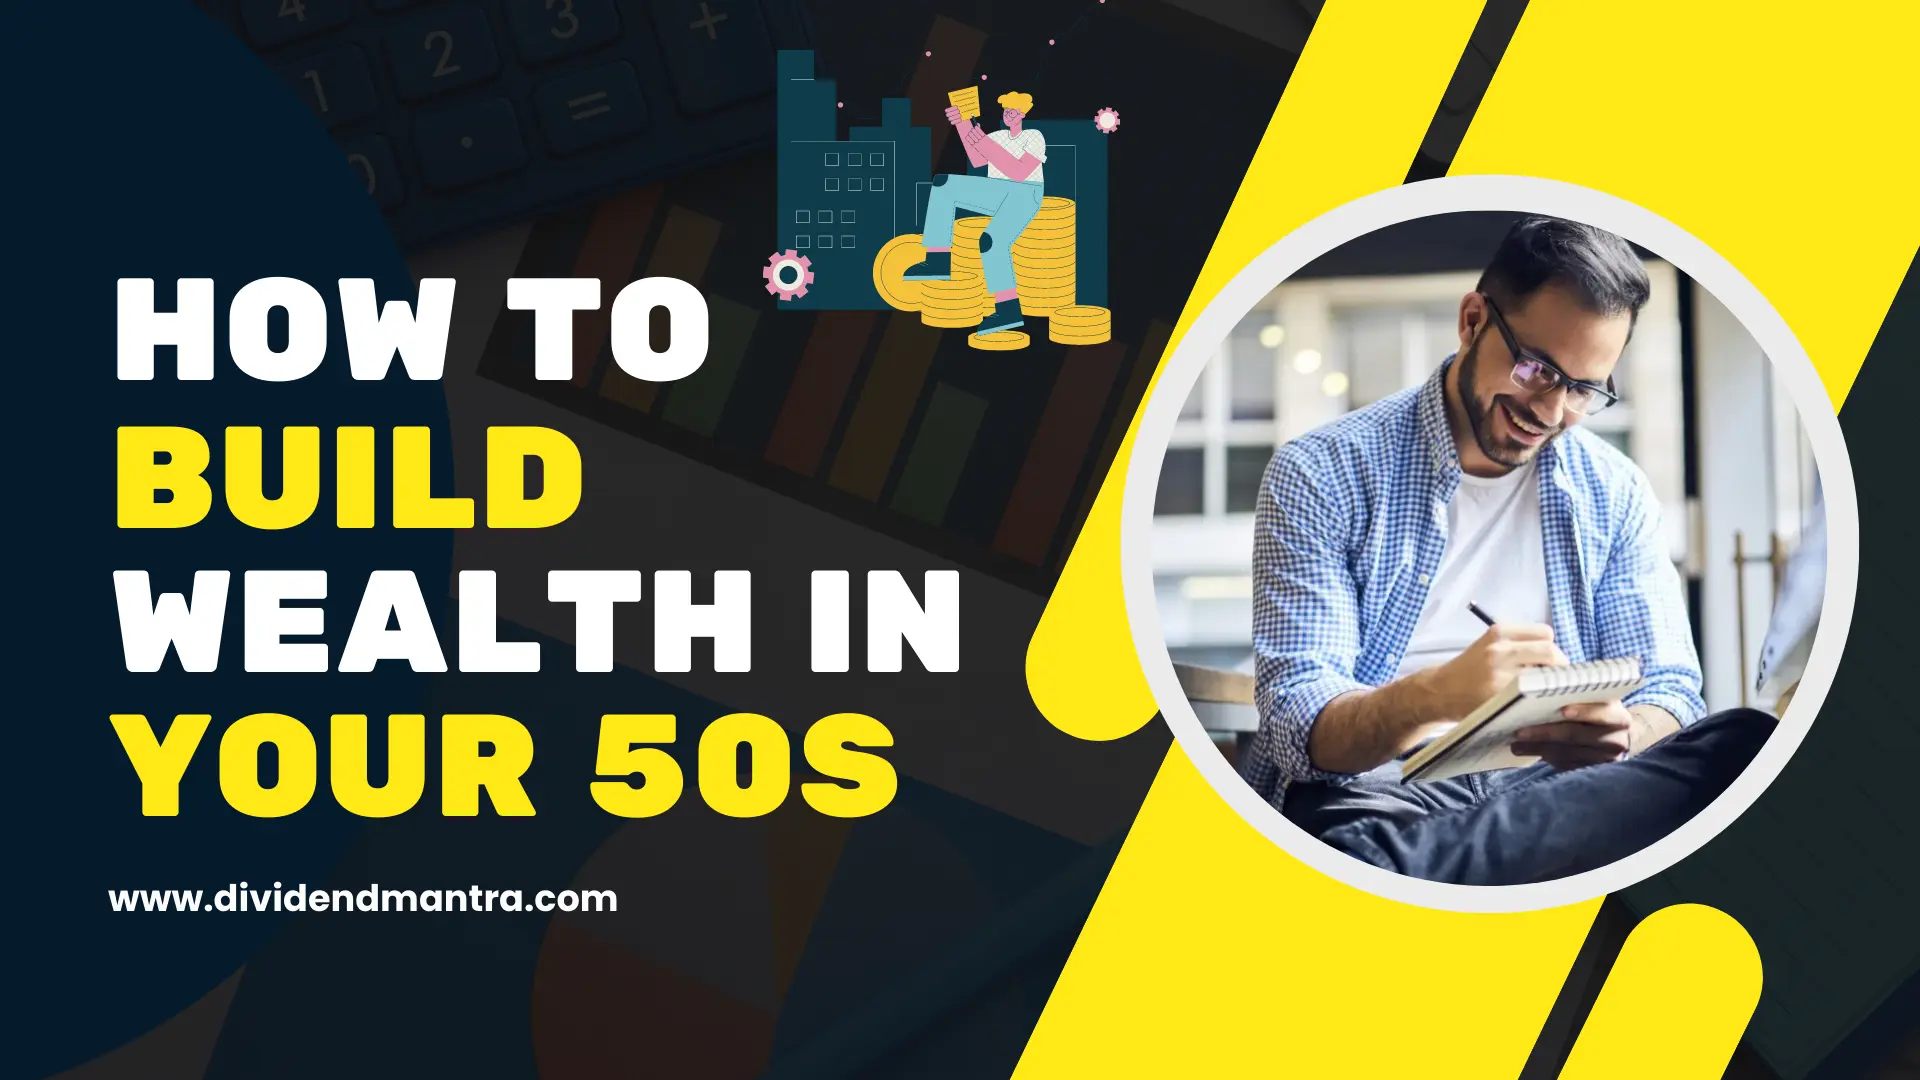 How To Build Wealth in Your 50s